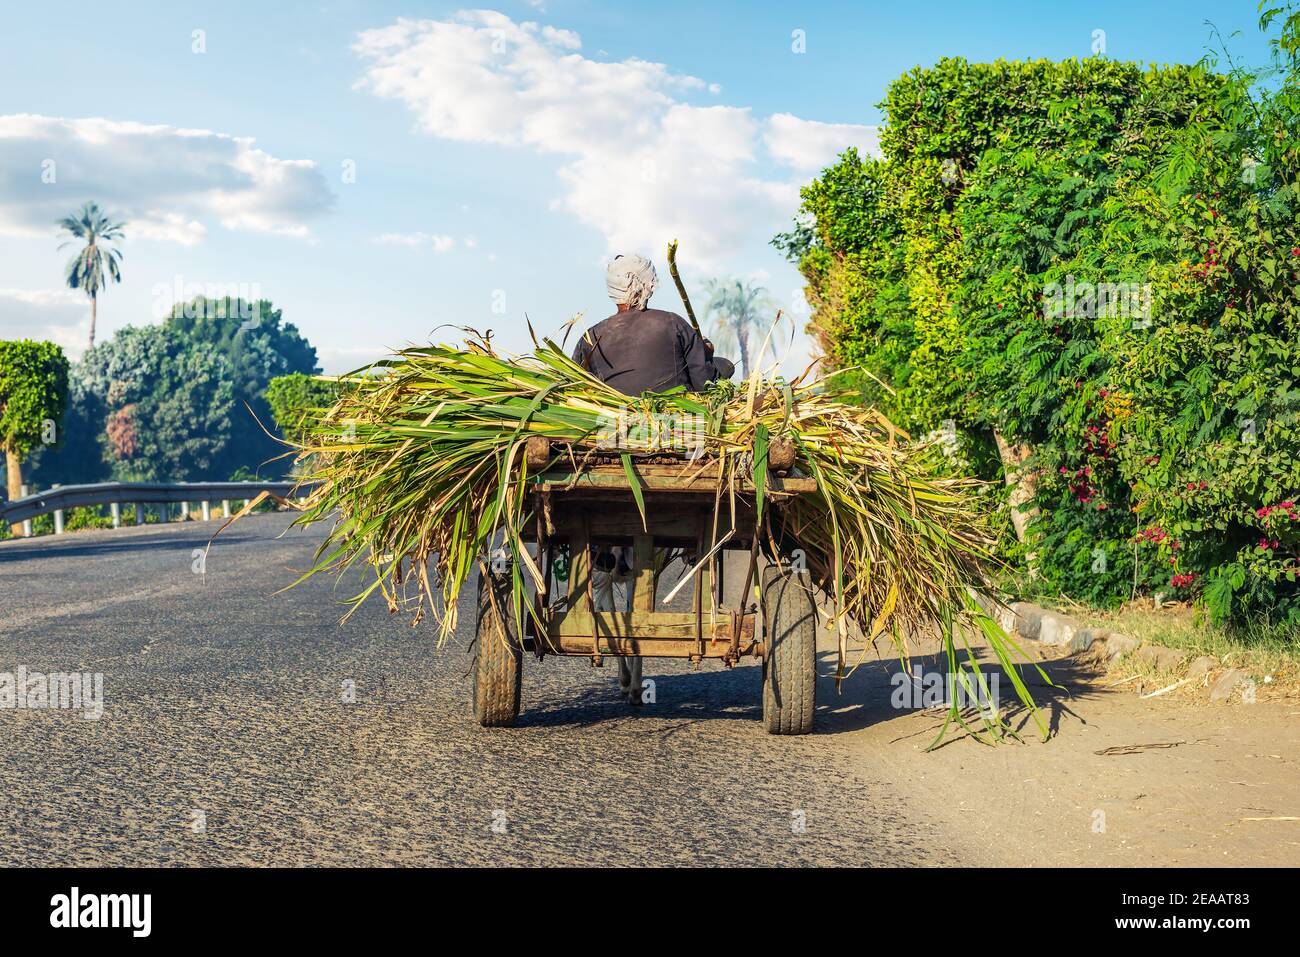 Egyptian peasant rides in a cart on the road along plantation. Agriculture is one of the most important sectors of Egypt's economy Stock Photo